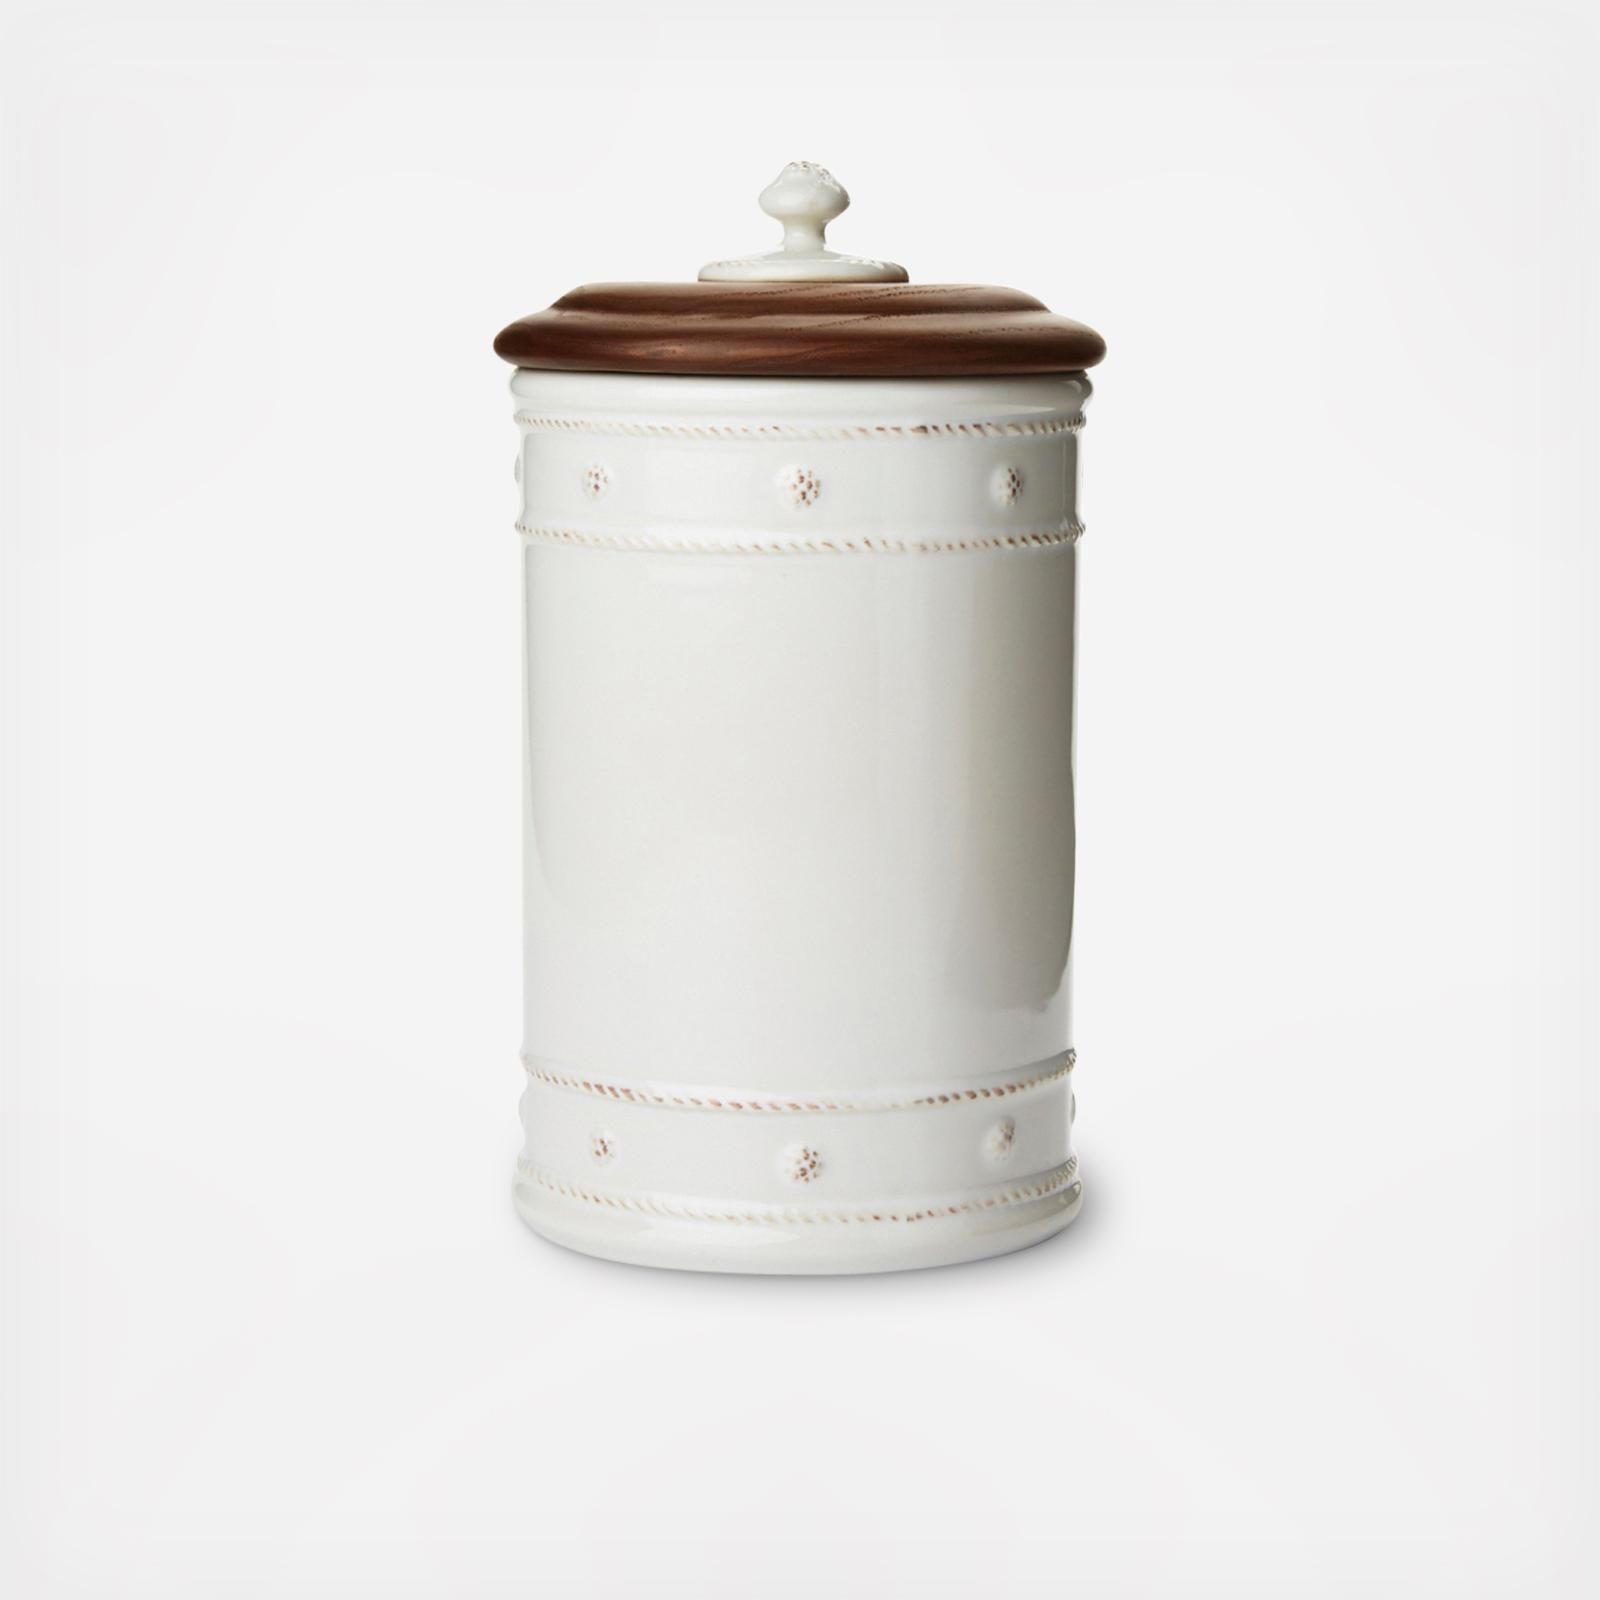 Juliska Berry & Thread Canister with Wooden Lid | Zola